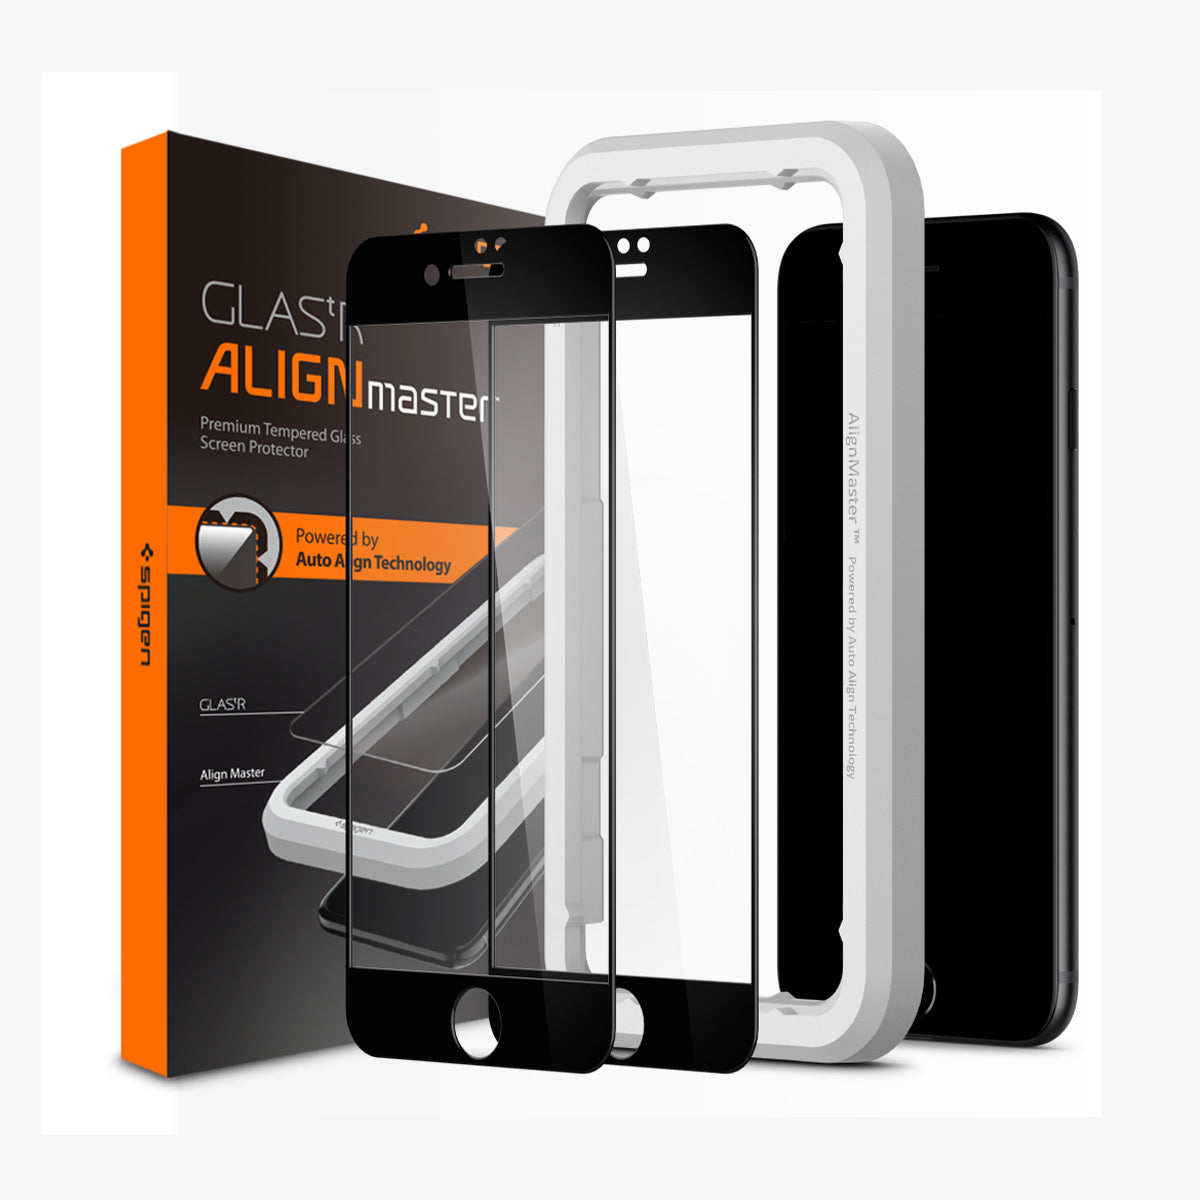 AGL01302 - iPhone SE Series Alignmaster Full Cover Screen Protector in black showing the device, alignmaster tray, two screen protectors and packaging